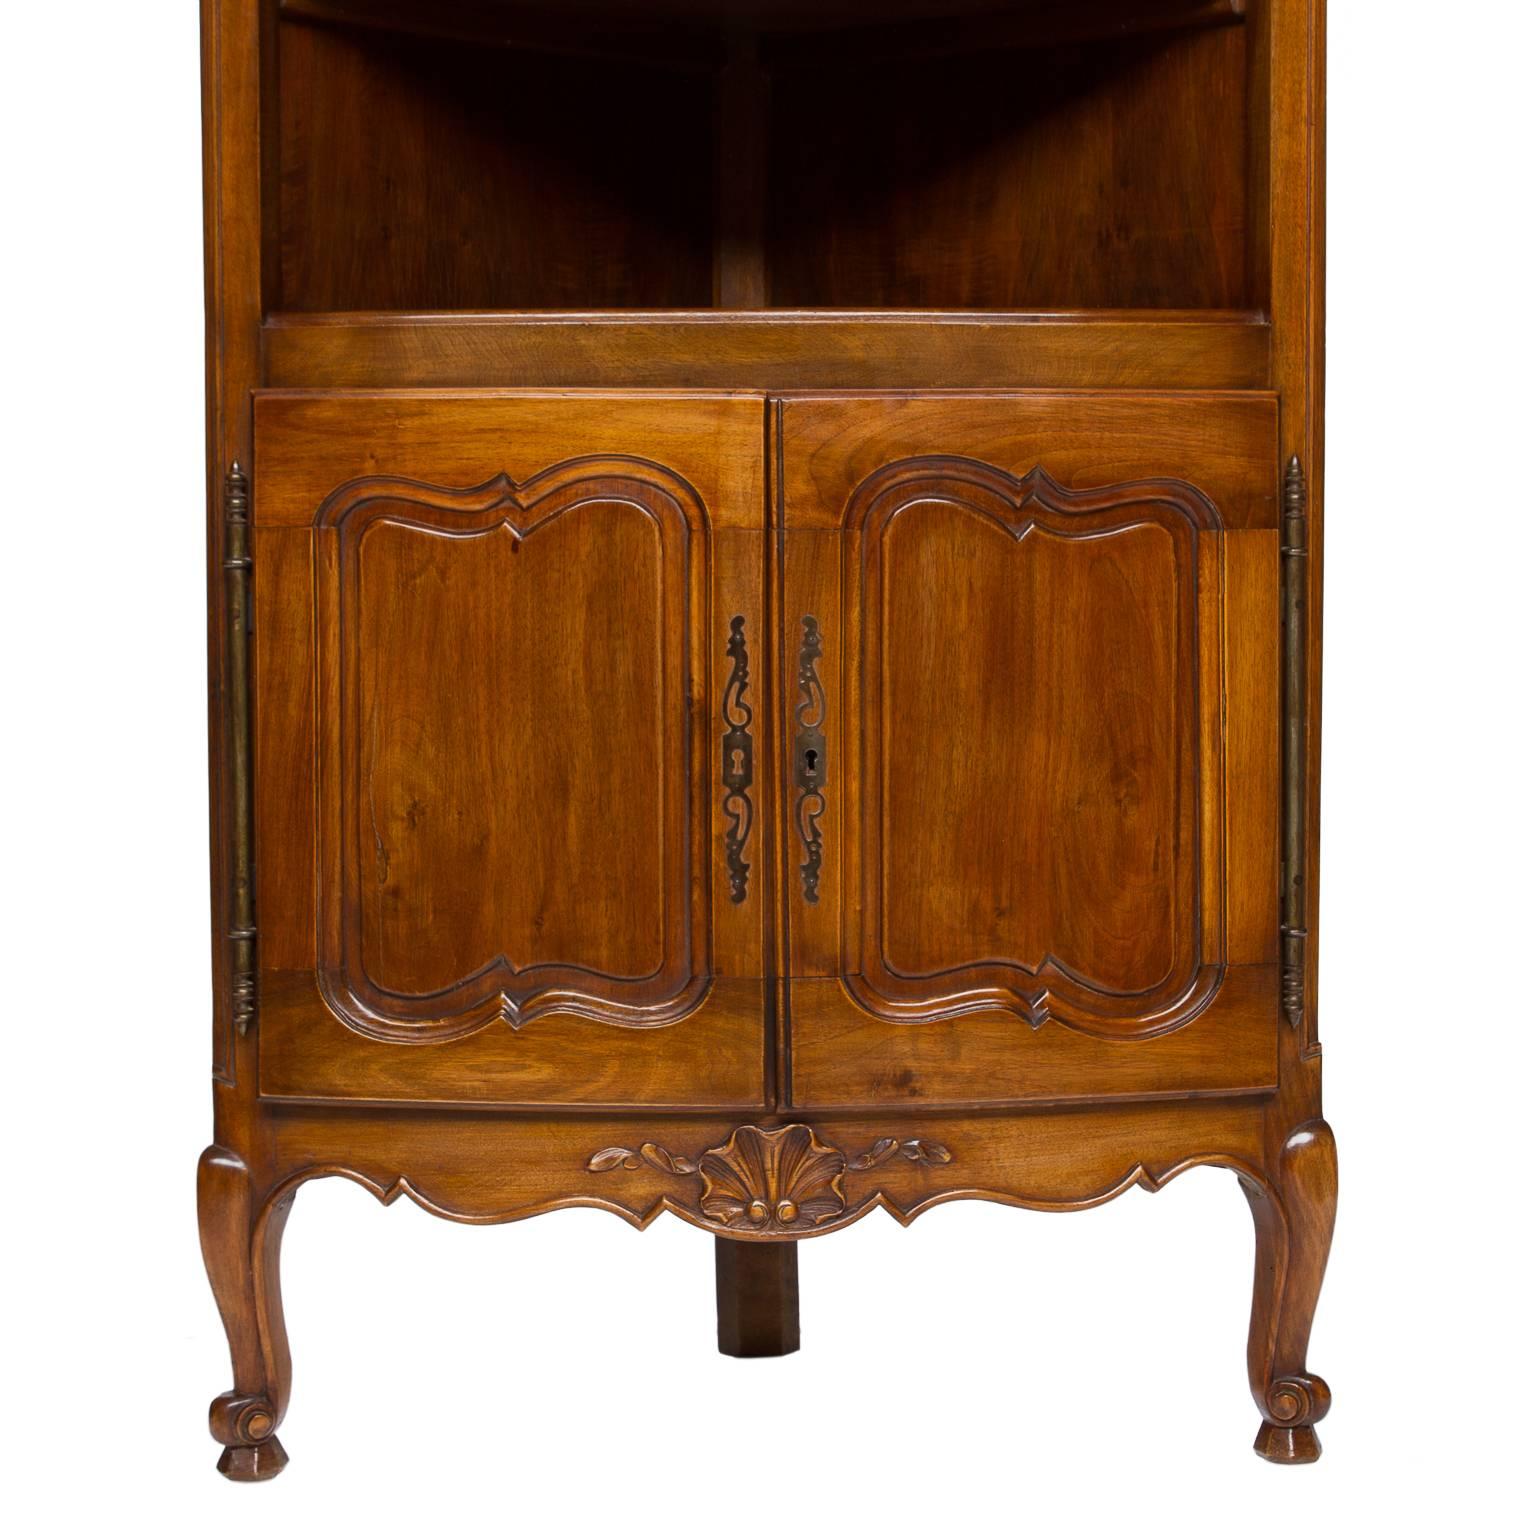 20th century provincial walnut corner cabinet.
Not real old but impressive appearance. There is a scalloped back splash on the top. One shelf and below two doors opening to storage. Scalloped apron with a carved shell. Resting on two cabriole legs